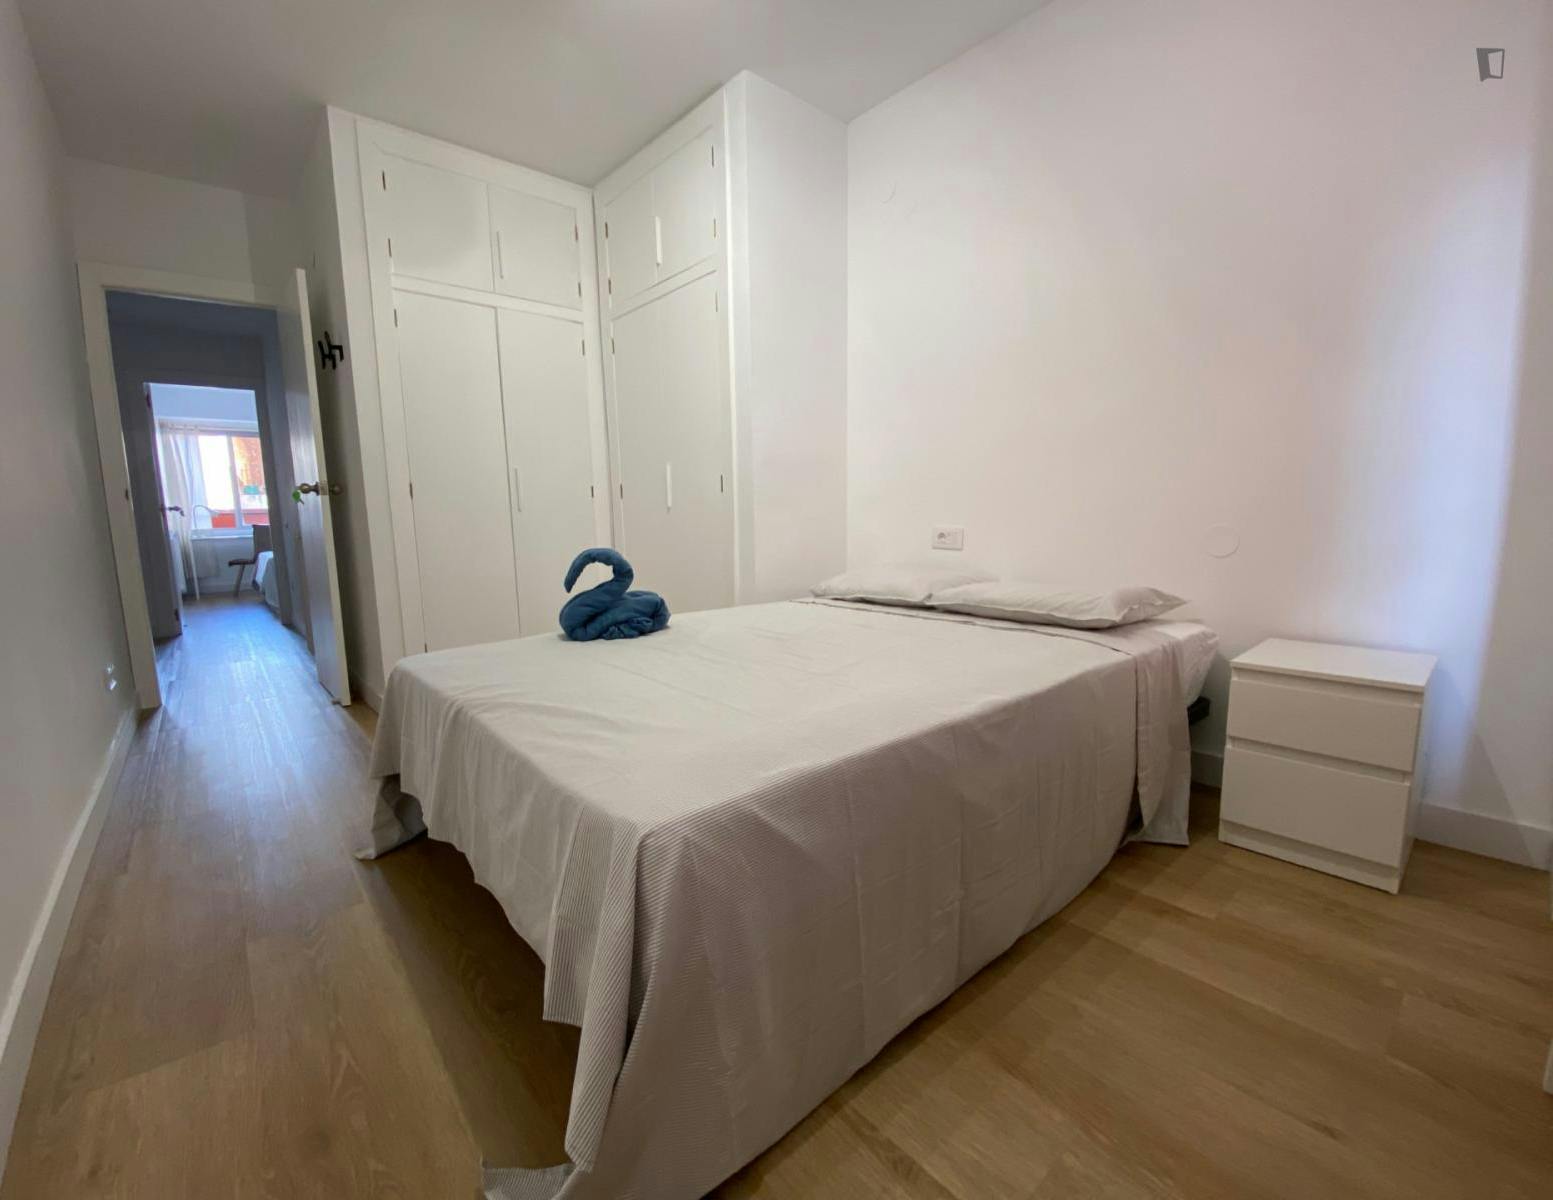 GREAT COMFORTABLE Bedroom in BEST LOCATION fully RENOVATED Apartment